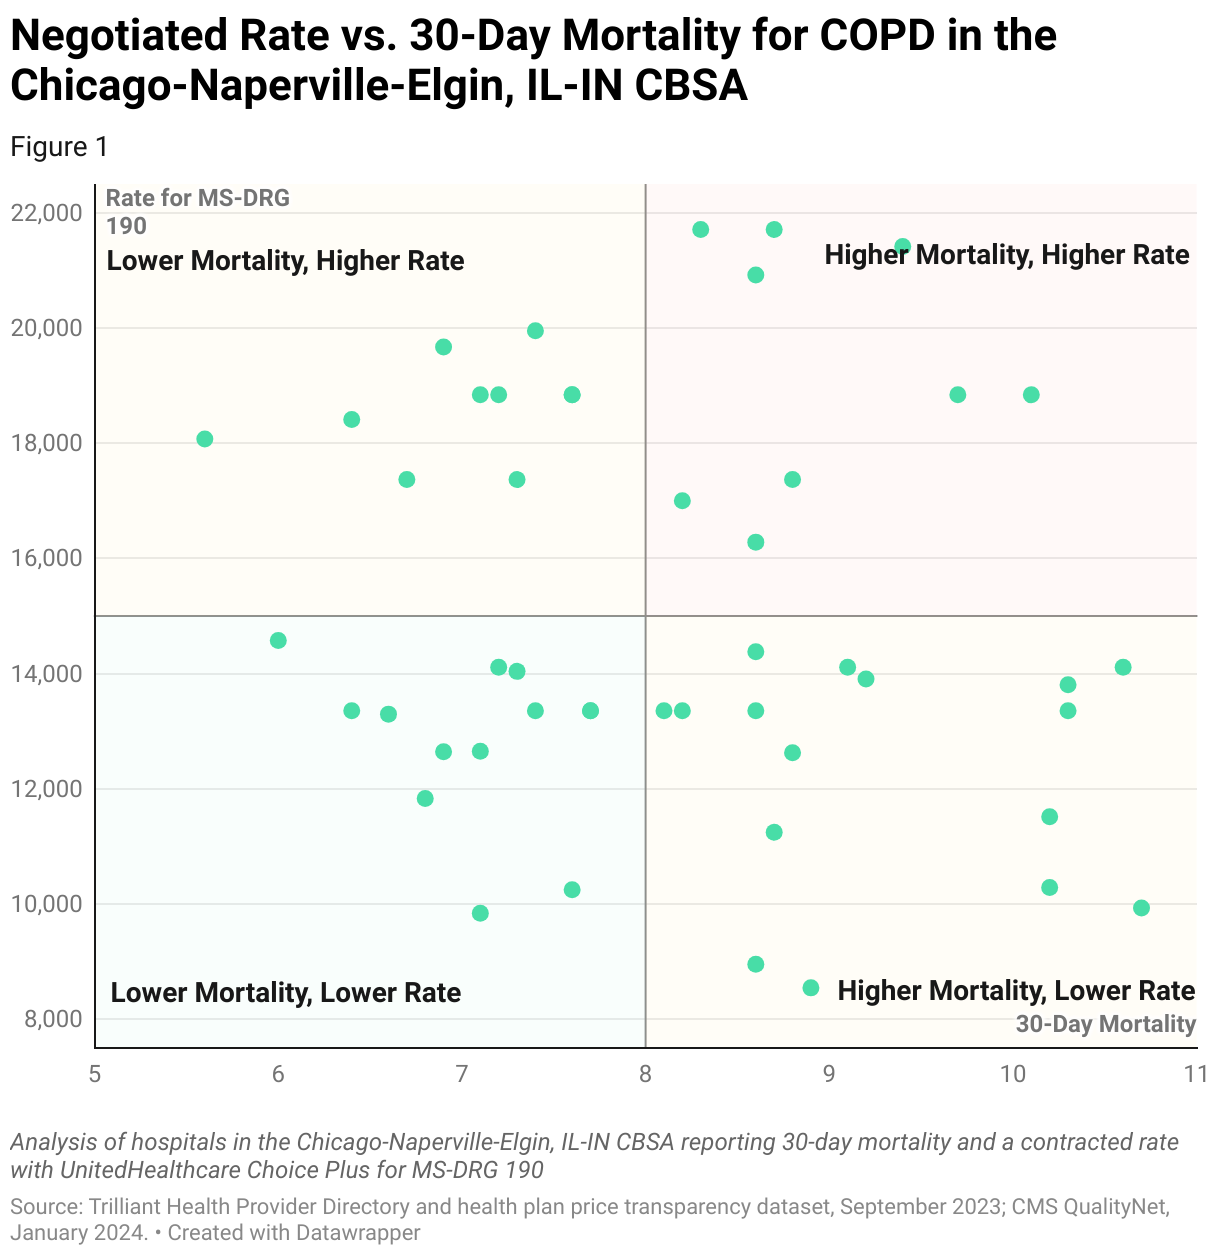 Chart comparing UnitedHealthcare Choice Plus in-network negotiated rates with 30-day post-discharge mortality for COPD for hospitals in the Chicago-Naperville-Elgin, IL-IN CBSA